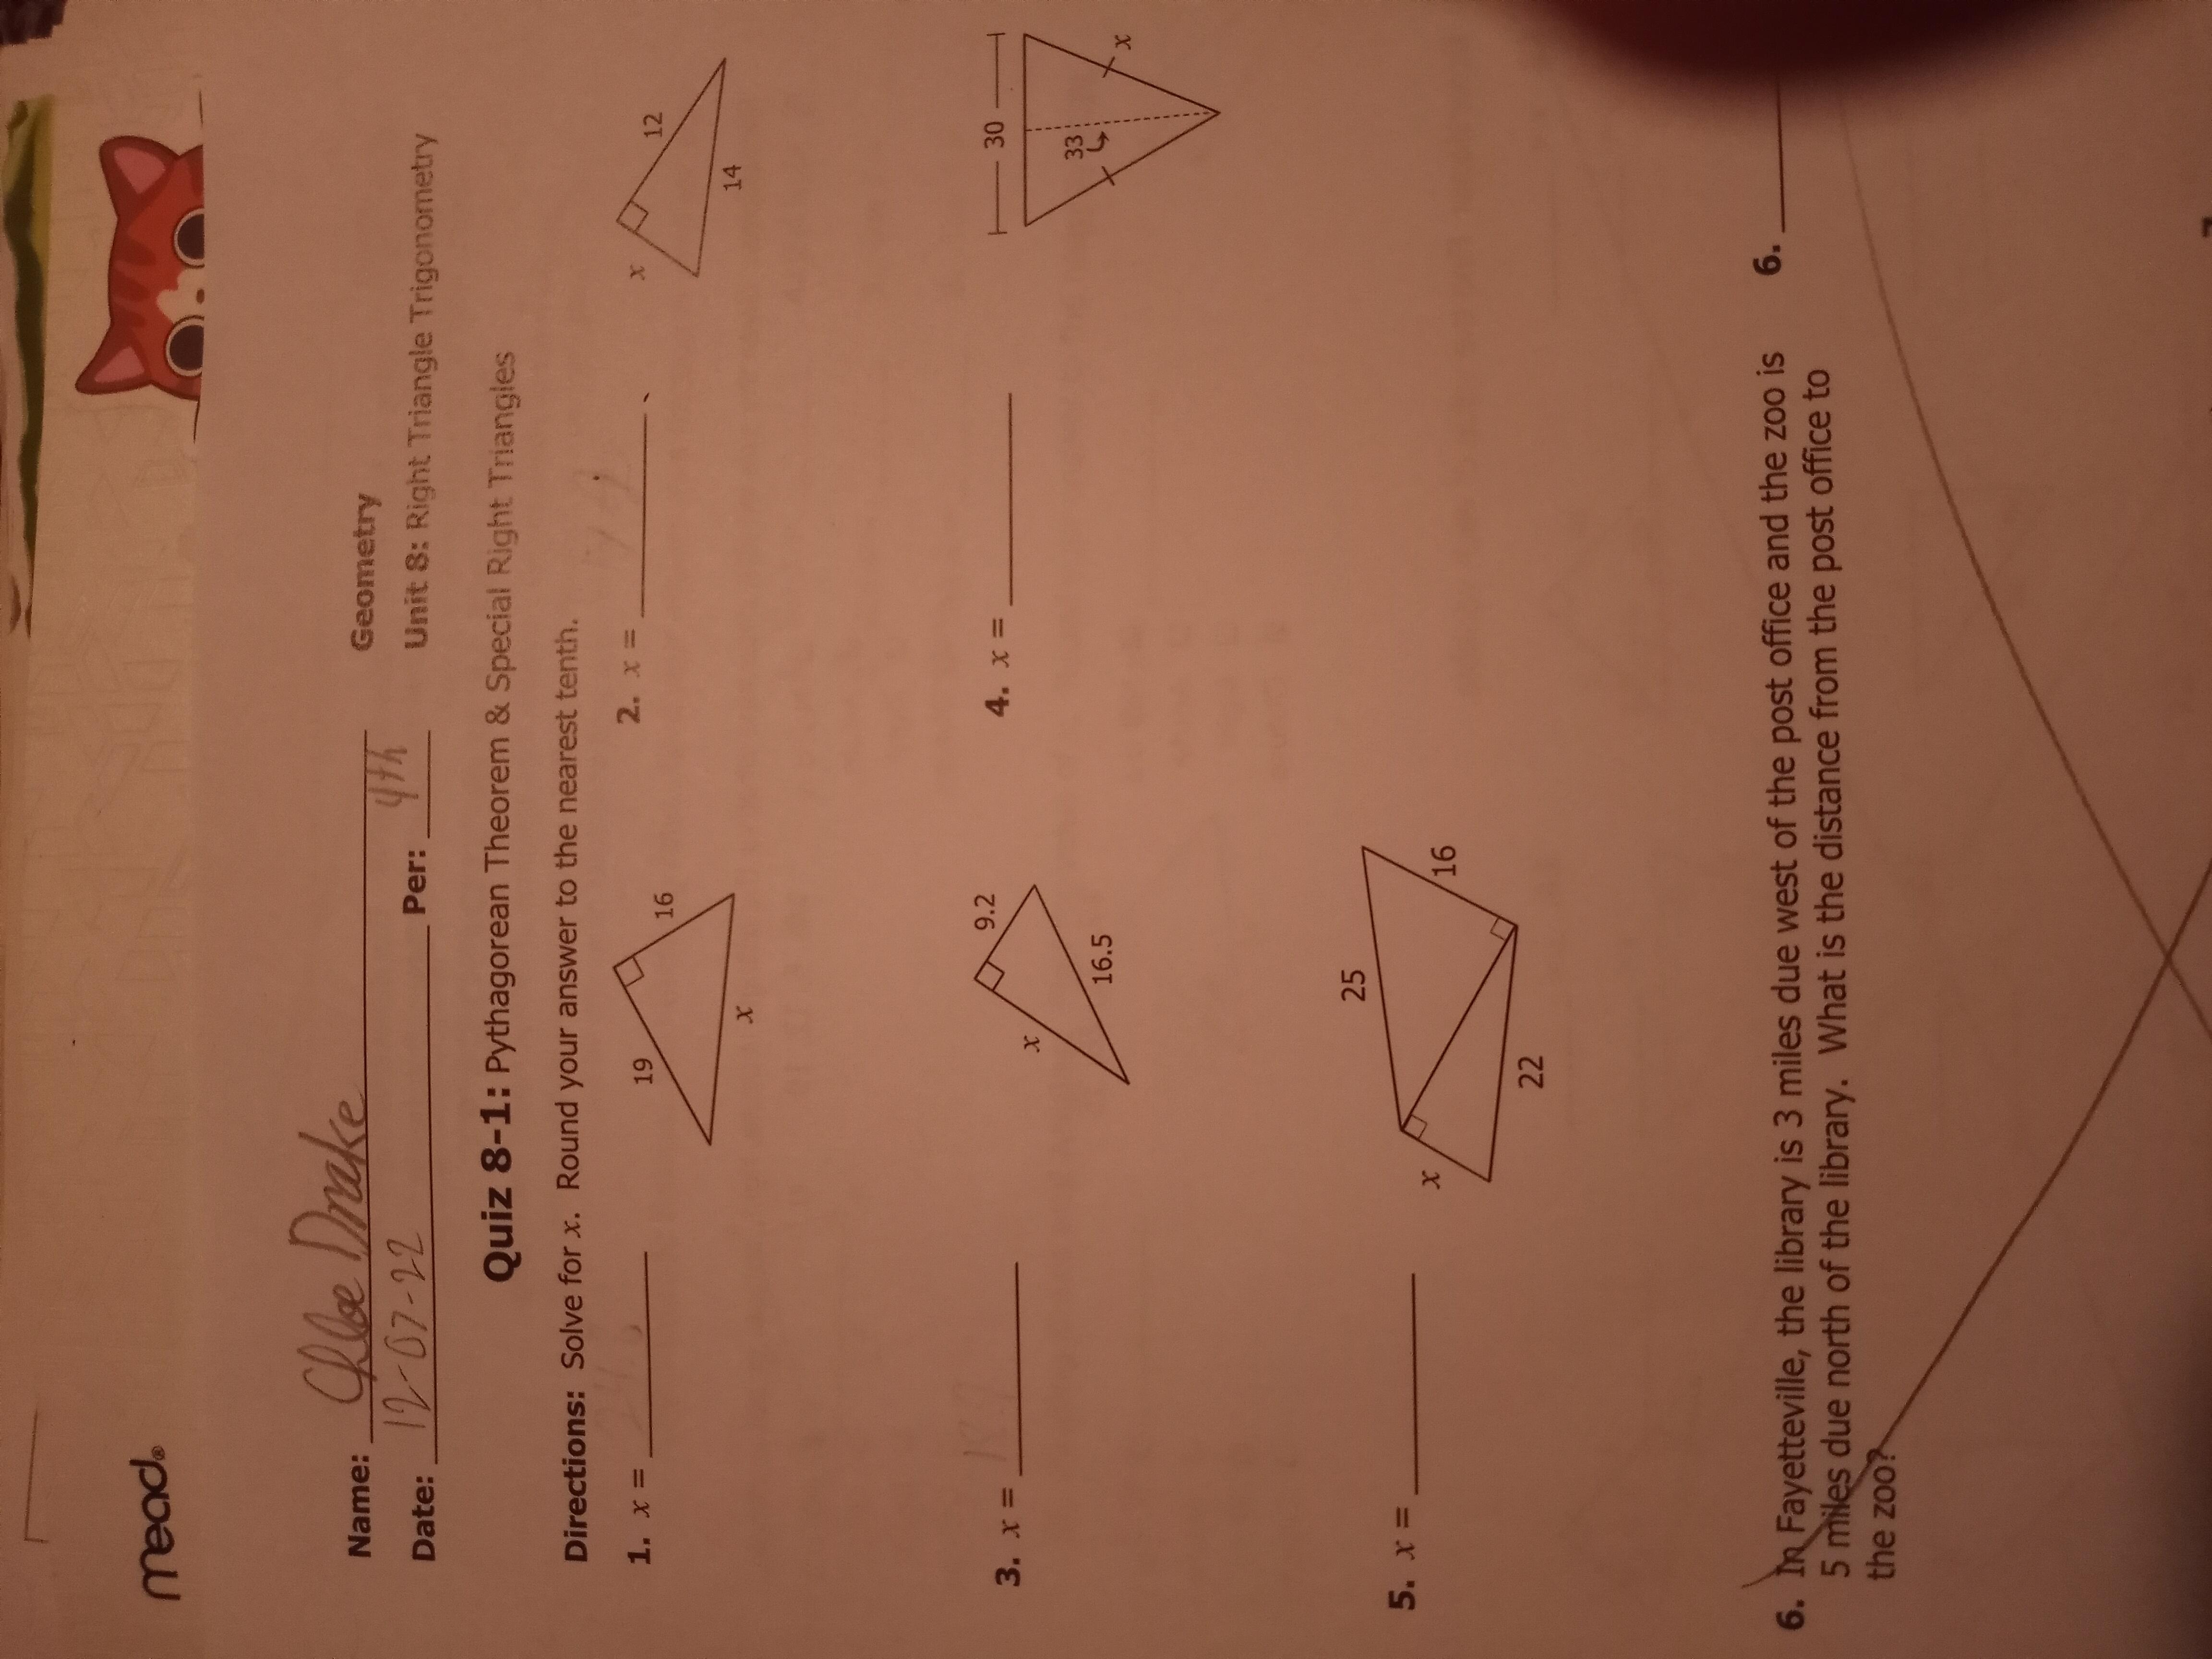 I've Been Having Problems With This And I Was Wondering If Someone Could Give Me The Answers 1 - 5